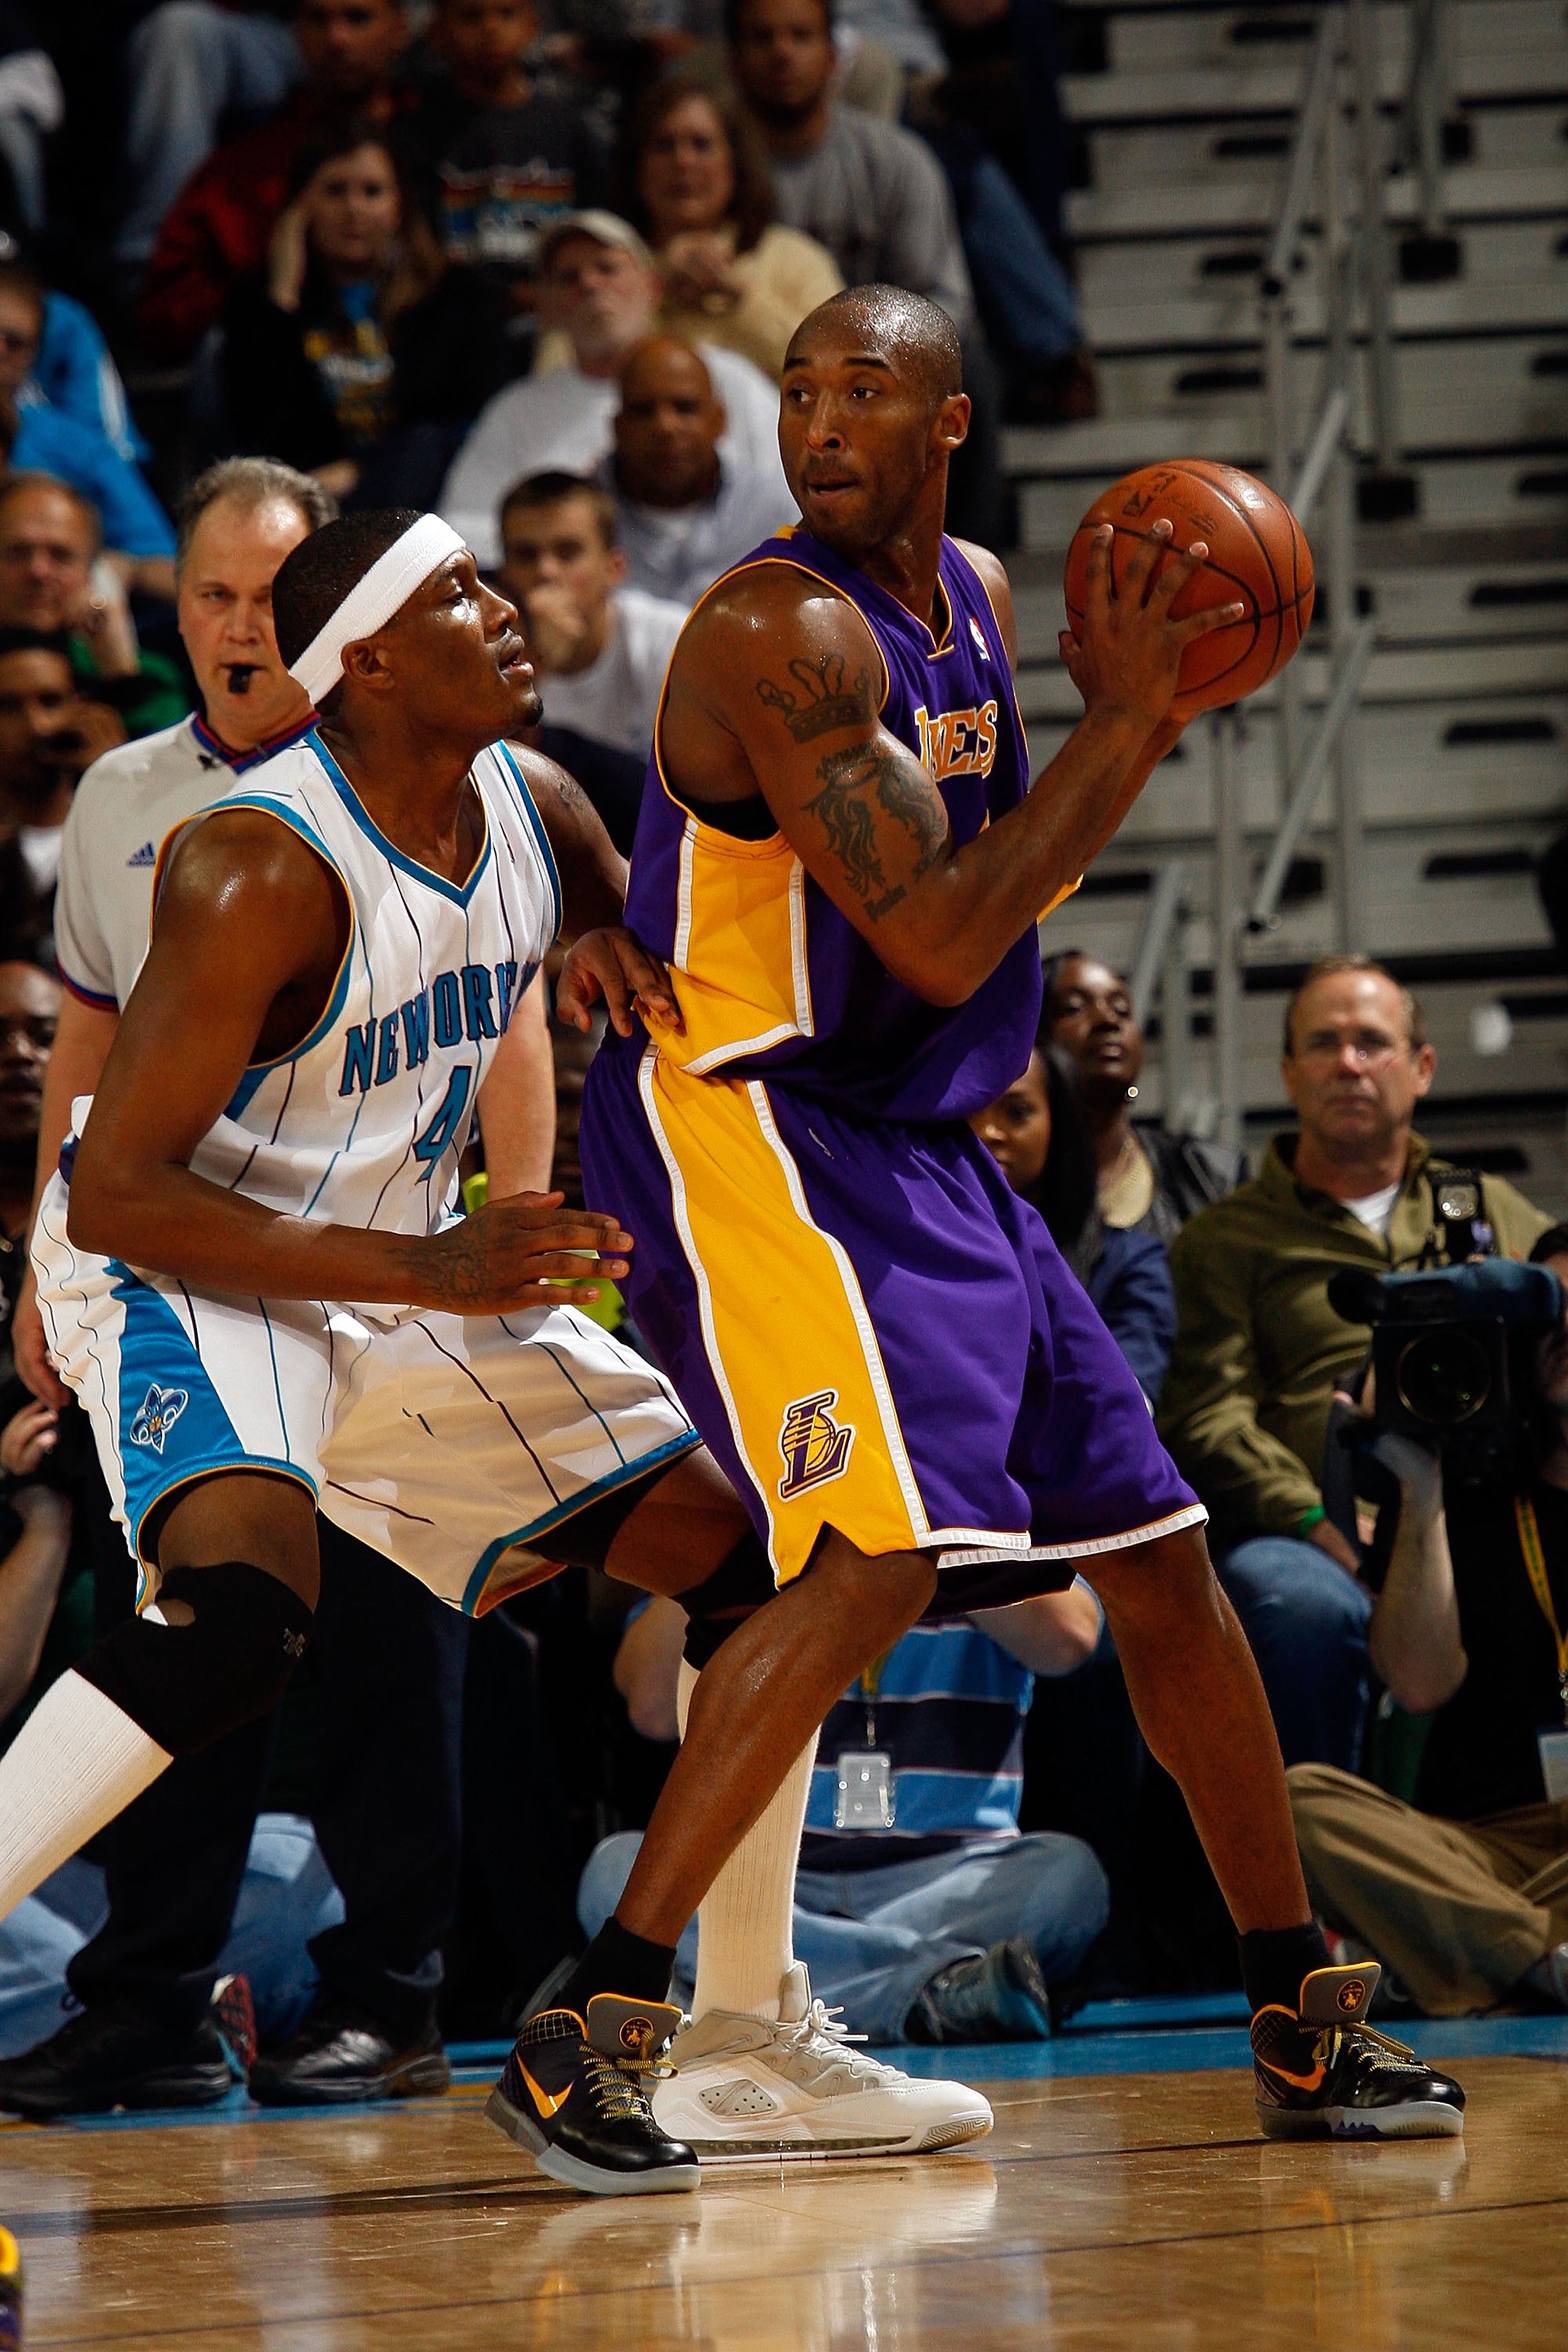 NEW ORLEANS - DECEMBER 23:  Kobe Bryant #24 of the Los Angeles Lakers drives against James Posey #41 of the New Orleans Hornets on December 23, 2008 at the New Orleans Arena in New Orleans, Louisiana.  NOTE TO USER: User expressly acknowledges and agrees 